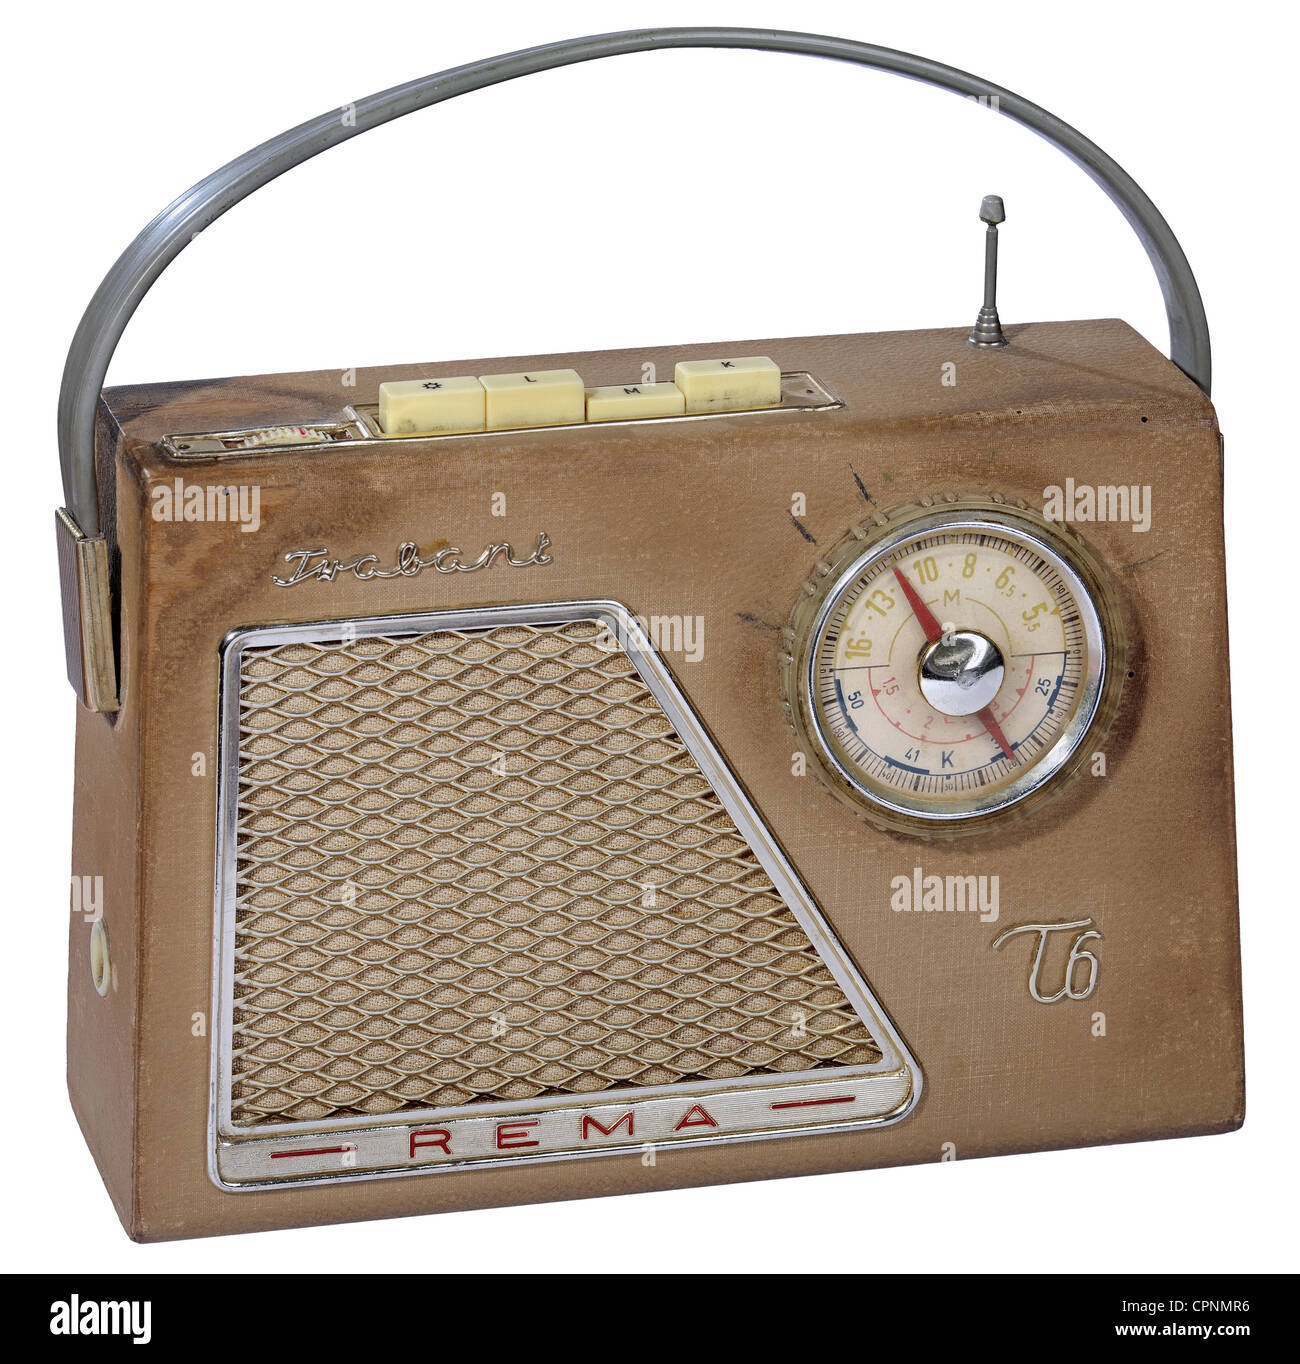 broadcast, radio, portable radio Rema 'Trabant T6', device is weighing 1.8kg, made by: Rema, Stollberg, Saxony, East-Germany, 1961, Additional-Rights-Clearences-Not Available Stock Photo